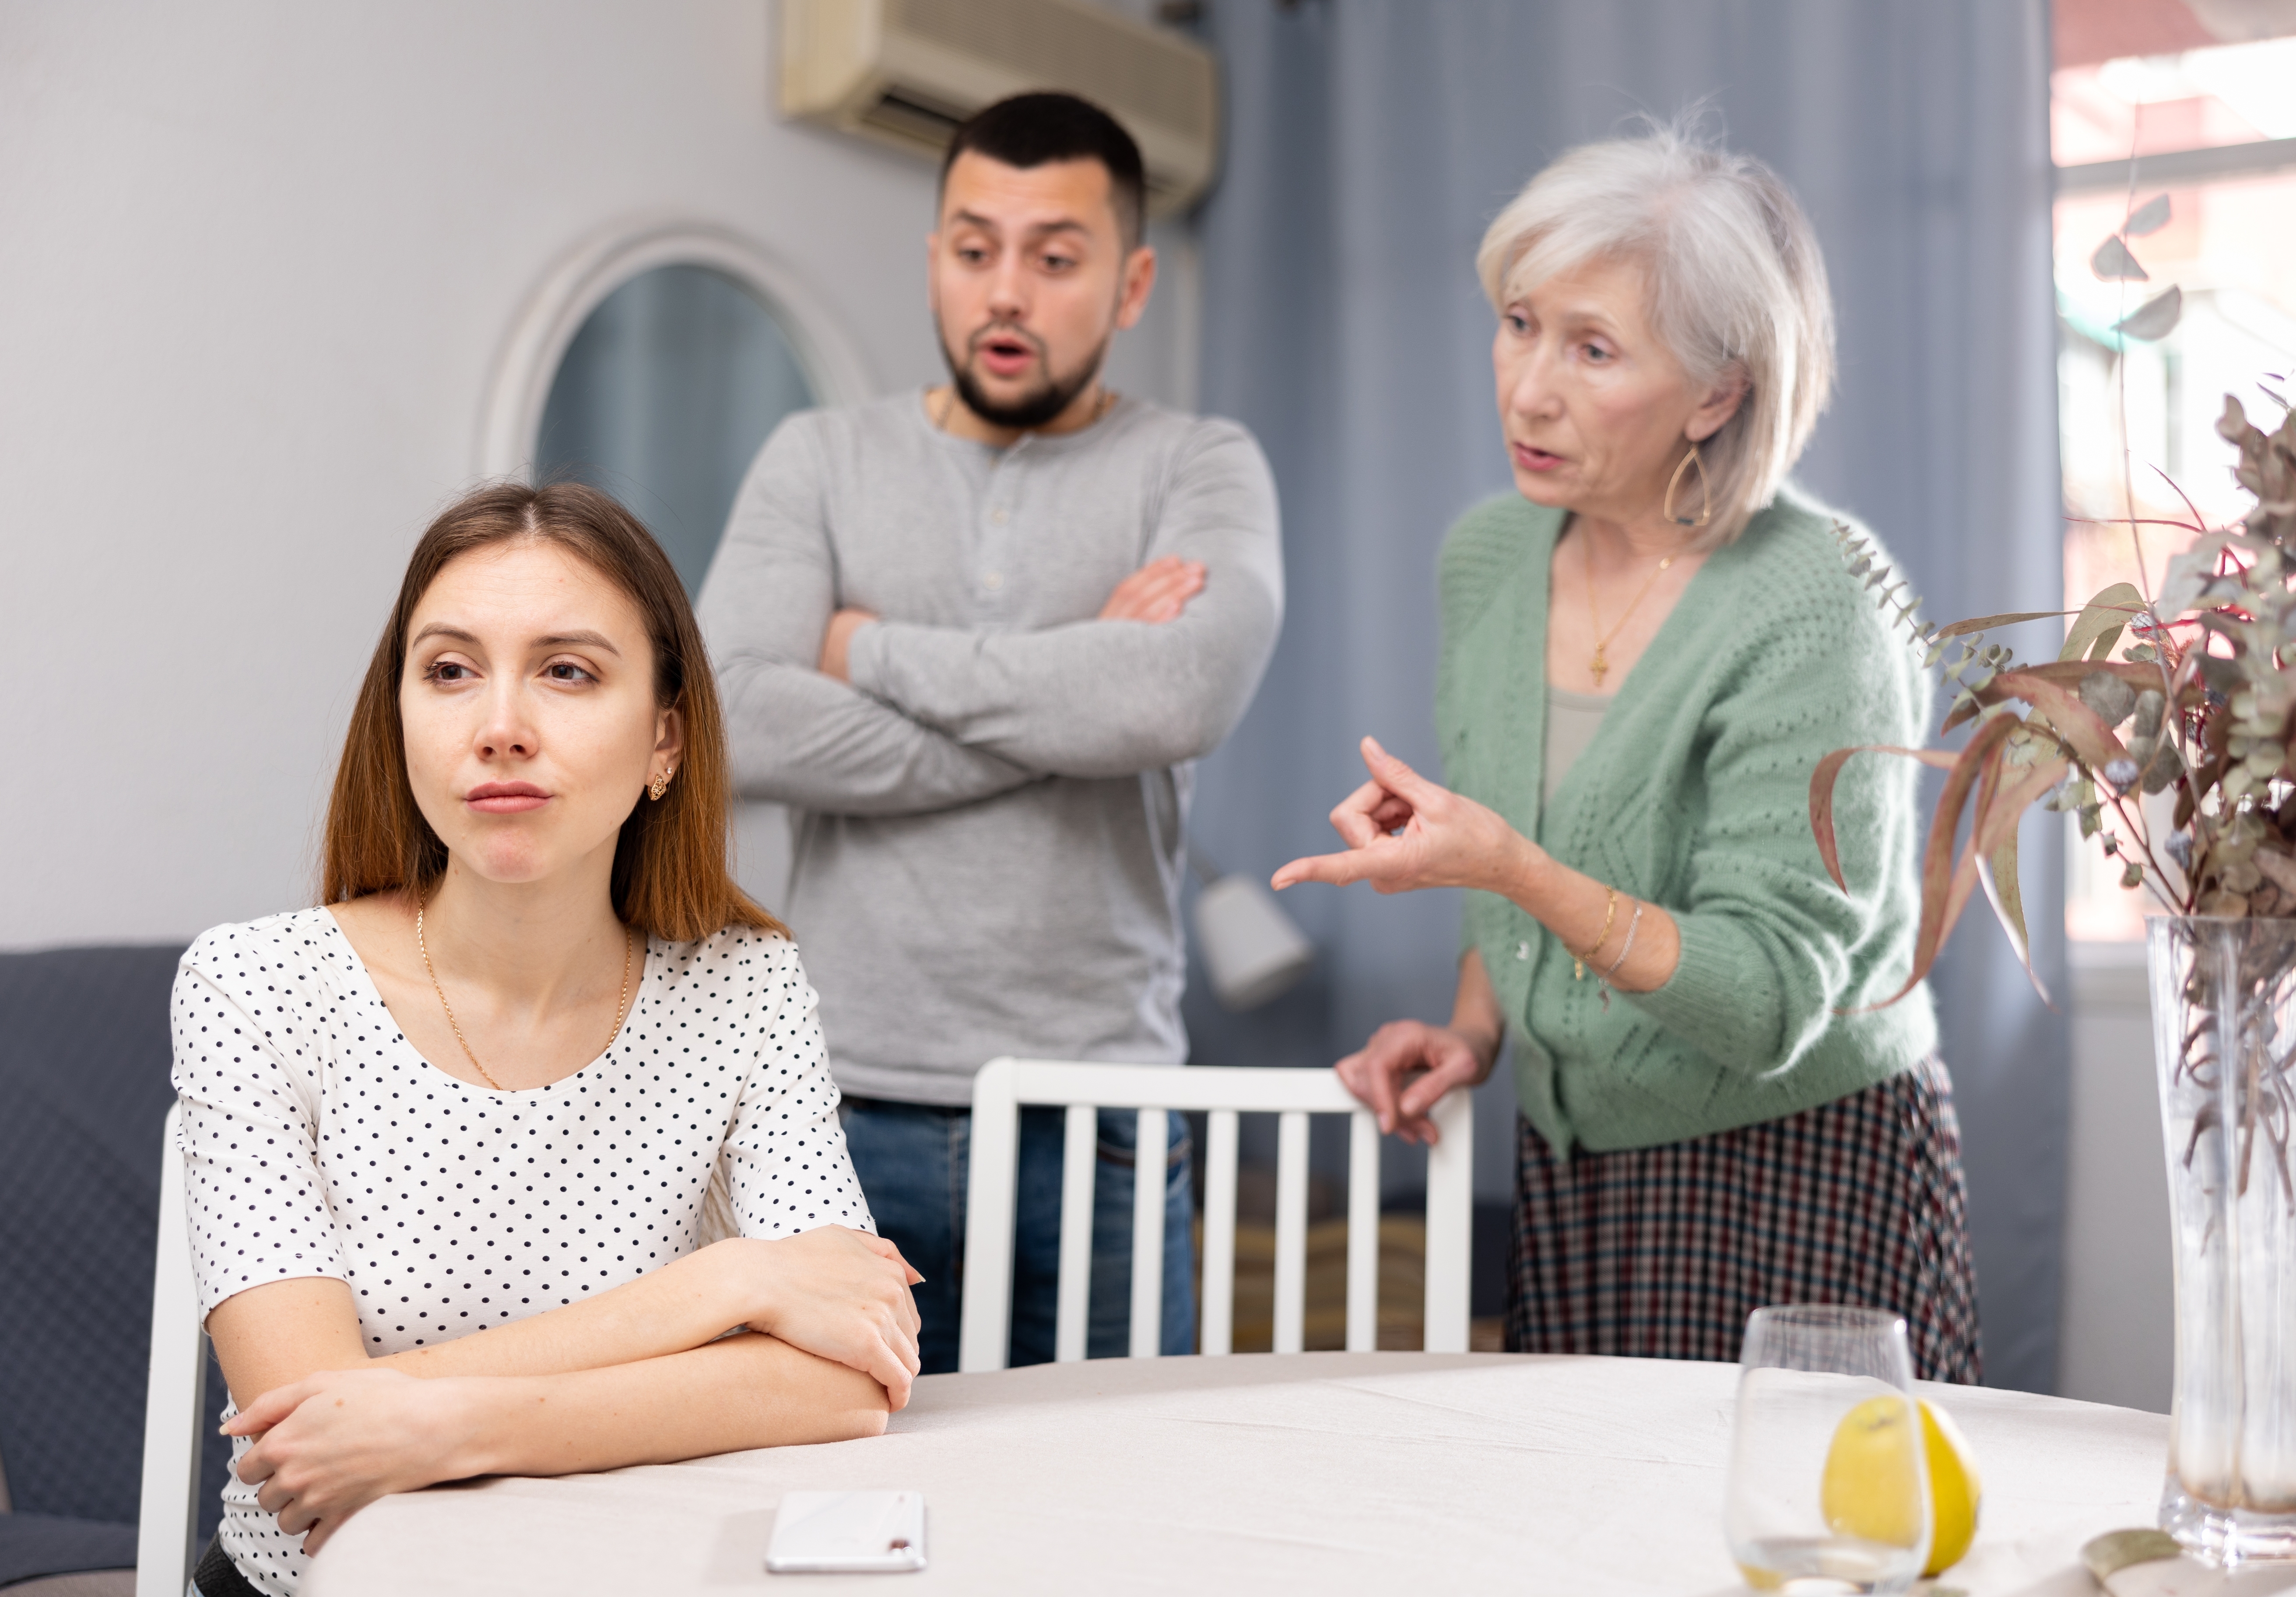 A woman crying as her husband and his mother talk to her | Source: Shutterstock